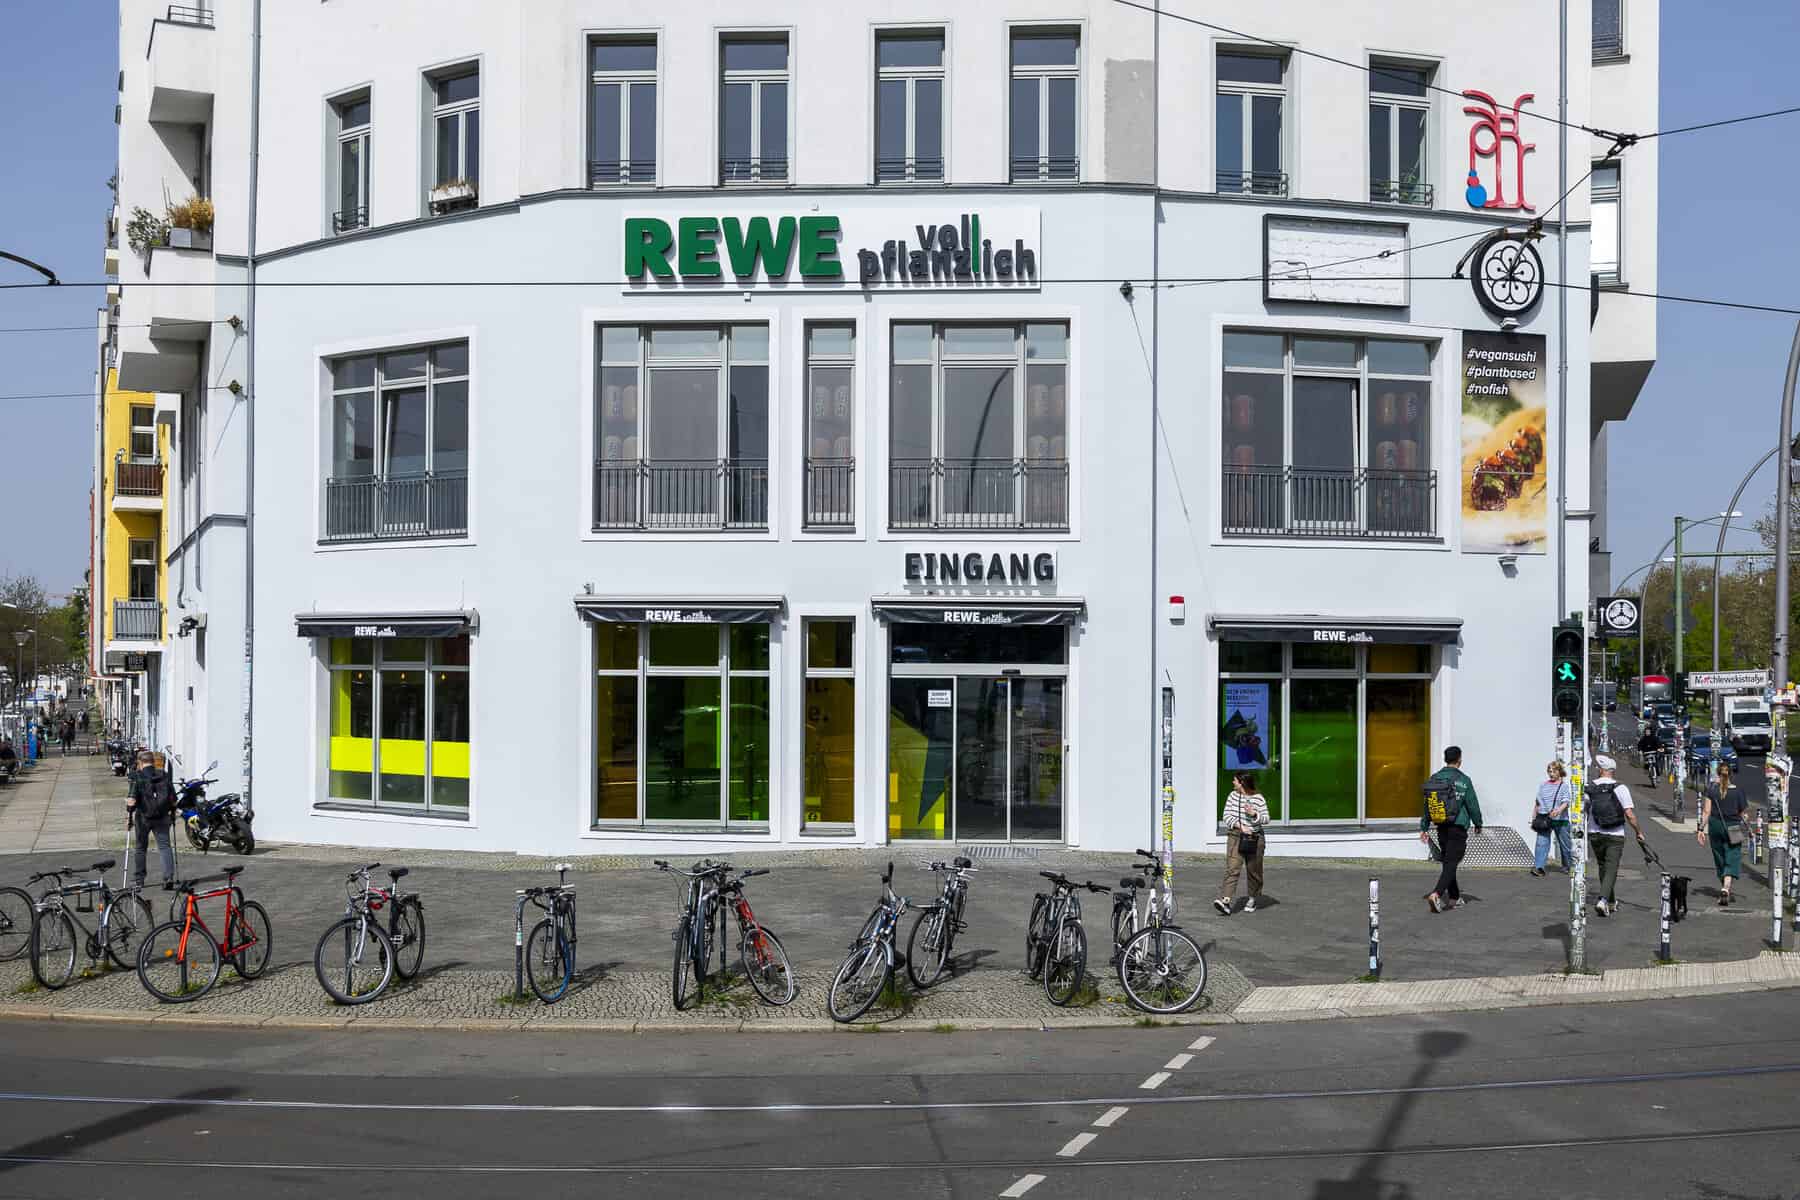 REWE opens its first fully plant-based supermarket in Berlin